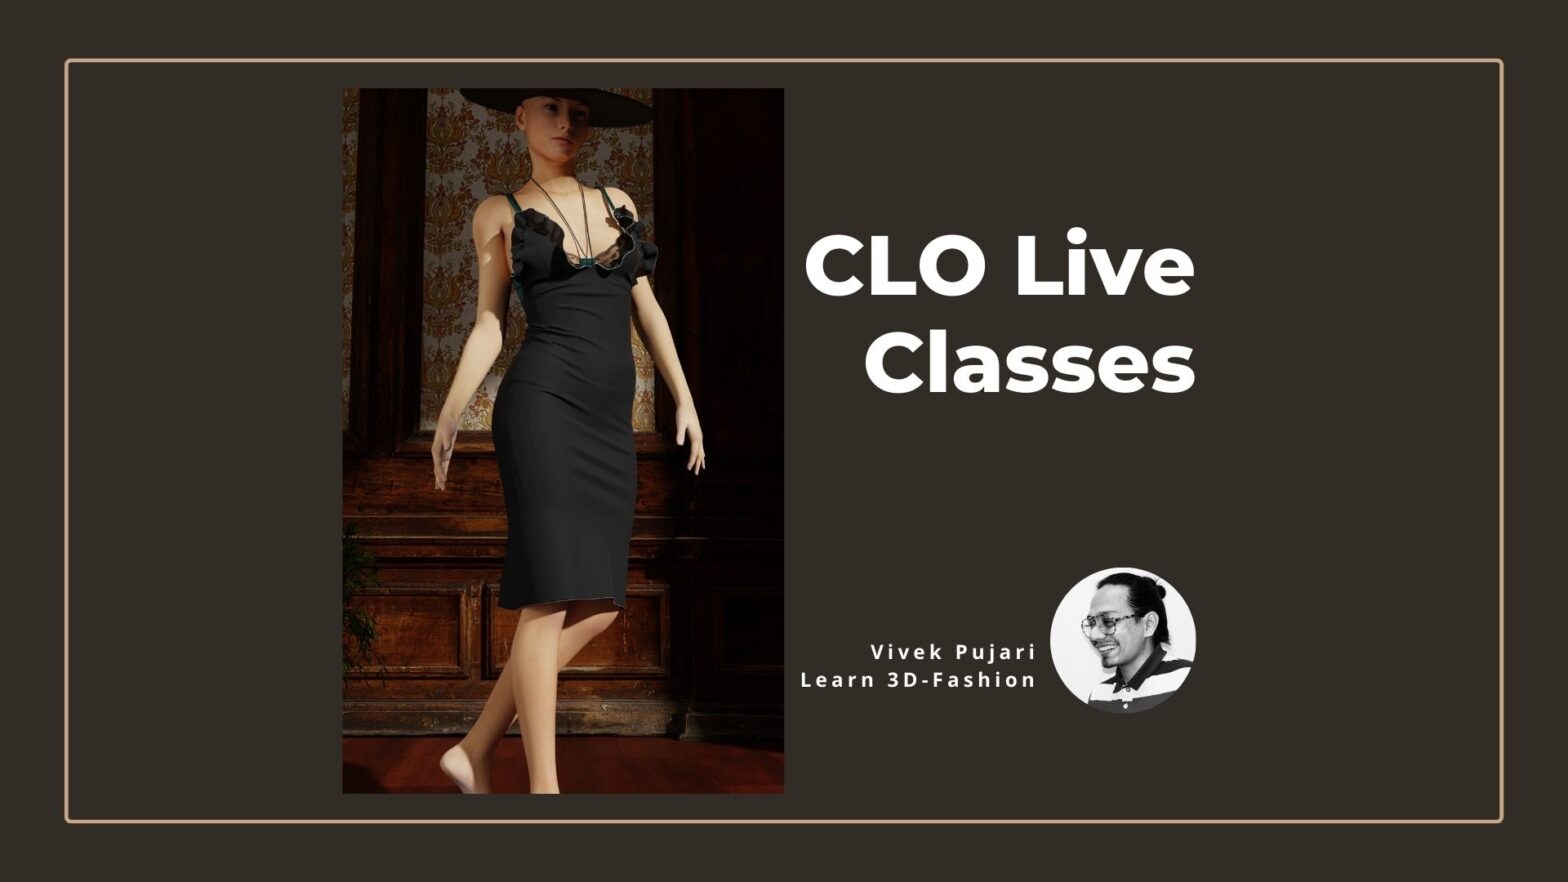 Clo 3D live classes by learn 3d fashion